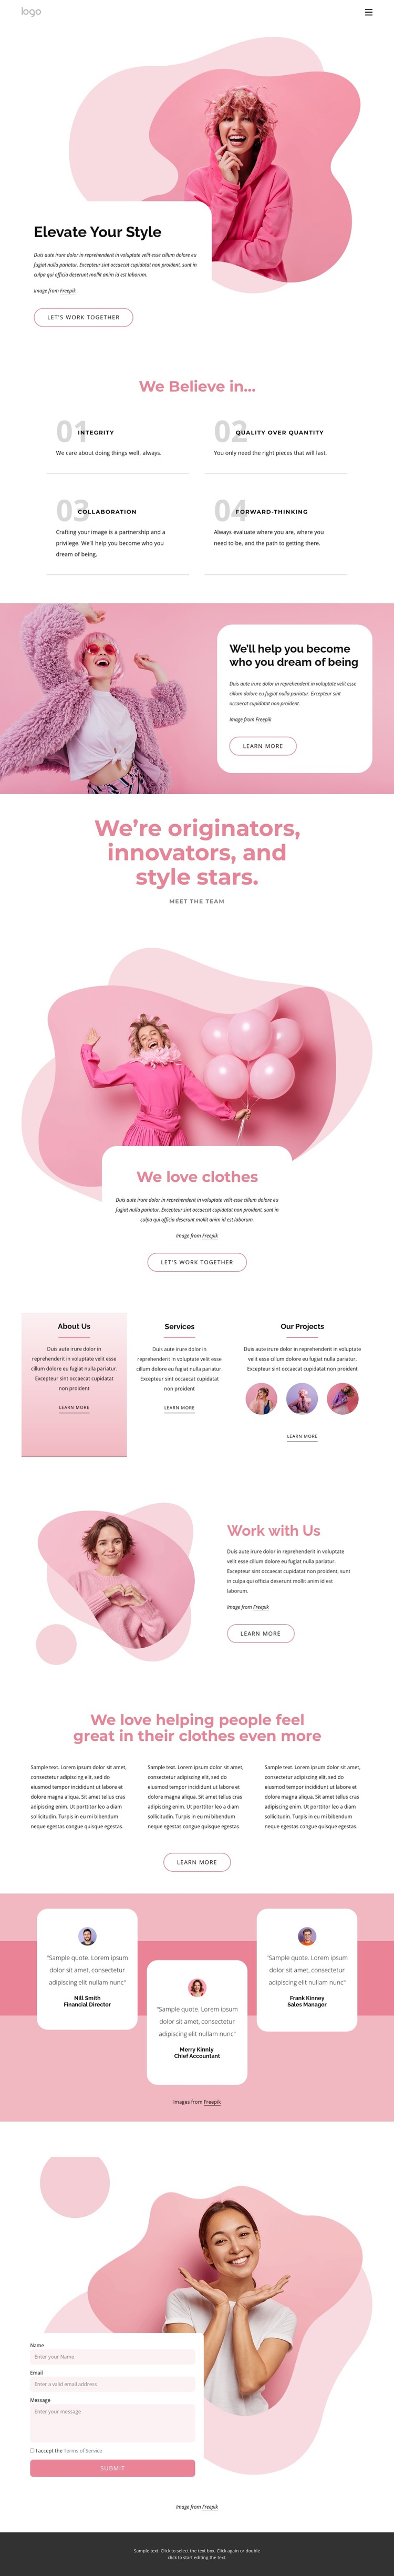 Elevate your style HTML5 Template